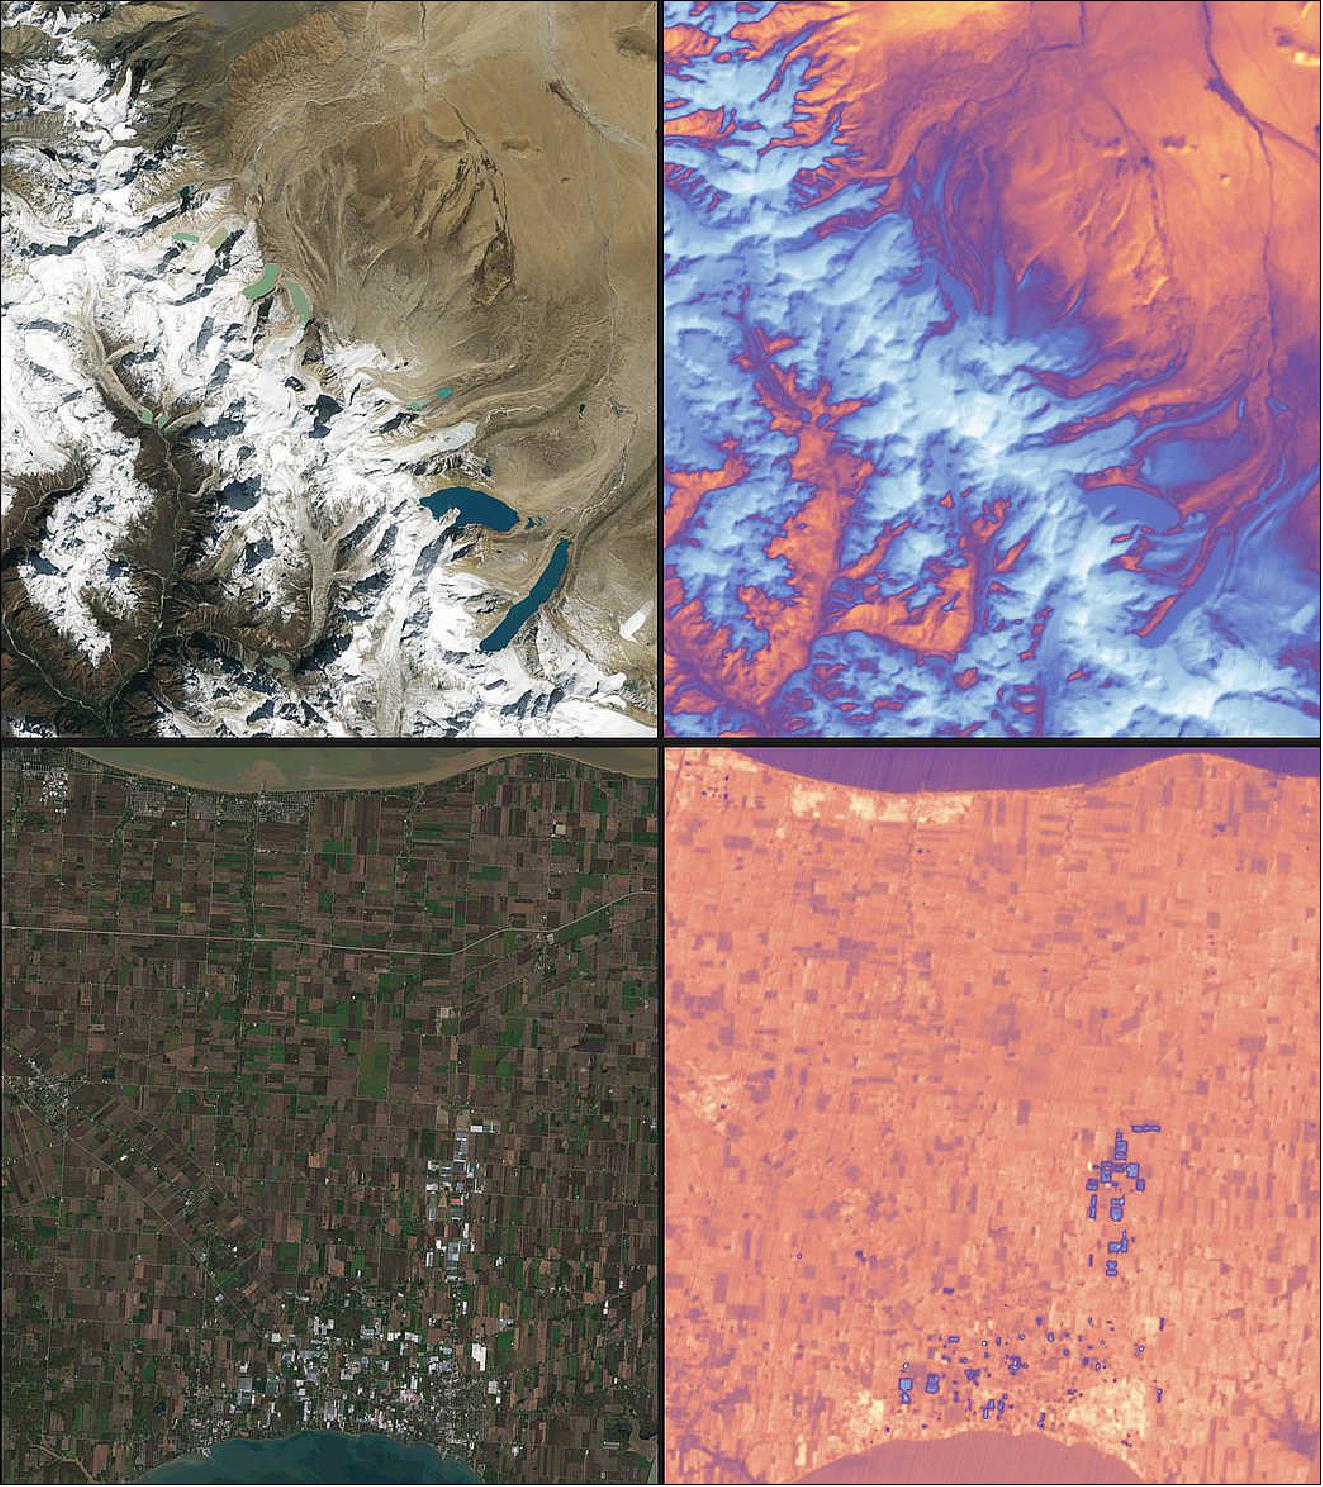 Figure 50: Landsat 9 carries two instruments designed to work together to capture a broad range of wavelengths: OLI-2 (Operational Land Imager-2), which detects nine different wavelengths of visible, near-infrared and shortwave-infrared light; and TIRS-2 (Thermal Infrared Sensor-2), which detects two wavelengths of thermal radiation to measure slight changes in temperature. Data from both instruments are shown in the two pairs in this image. — The top left shows snow and glaciers in the Himalayan mountains, leading to the flat Tibetan Plateau to the north. The top right shows the same area in thermal data from the TIRS-2 instrument. Blue-white color indicates relatively cooler surface temperatures, while orange-red indicates warmer surface temperatures. — The bottom left shows the brown and green rectangles of farm fields in southern Ontario, sandwiched between Lake Erie and Lake St. Clair. The white and grey rectangles in the bottom of the image are produce greenhouses, which show up as blue-ish (relatively cooler) spots in the TIRS-2 image on the right (image credit: NASA/USGS)